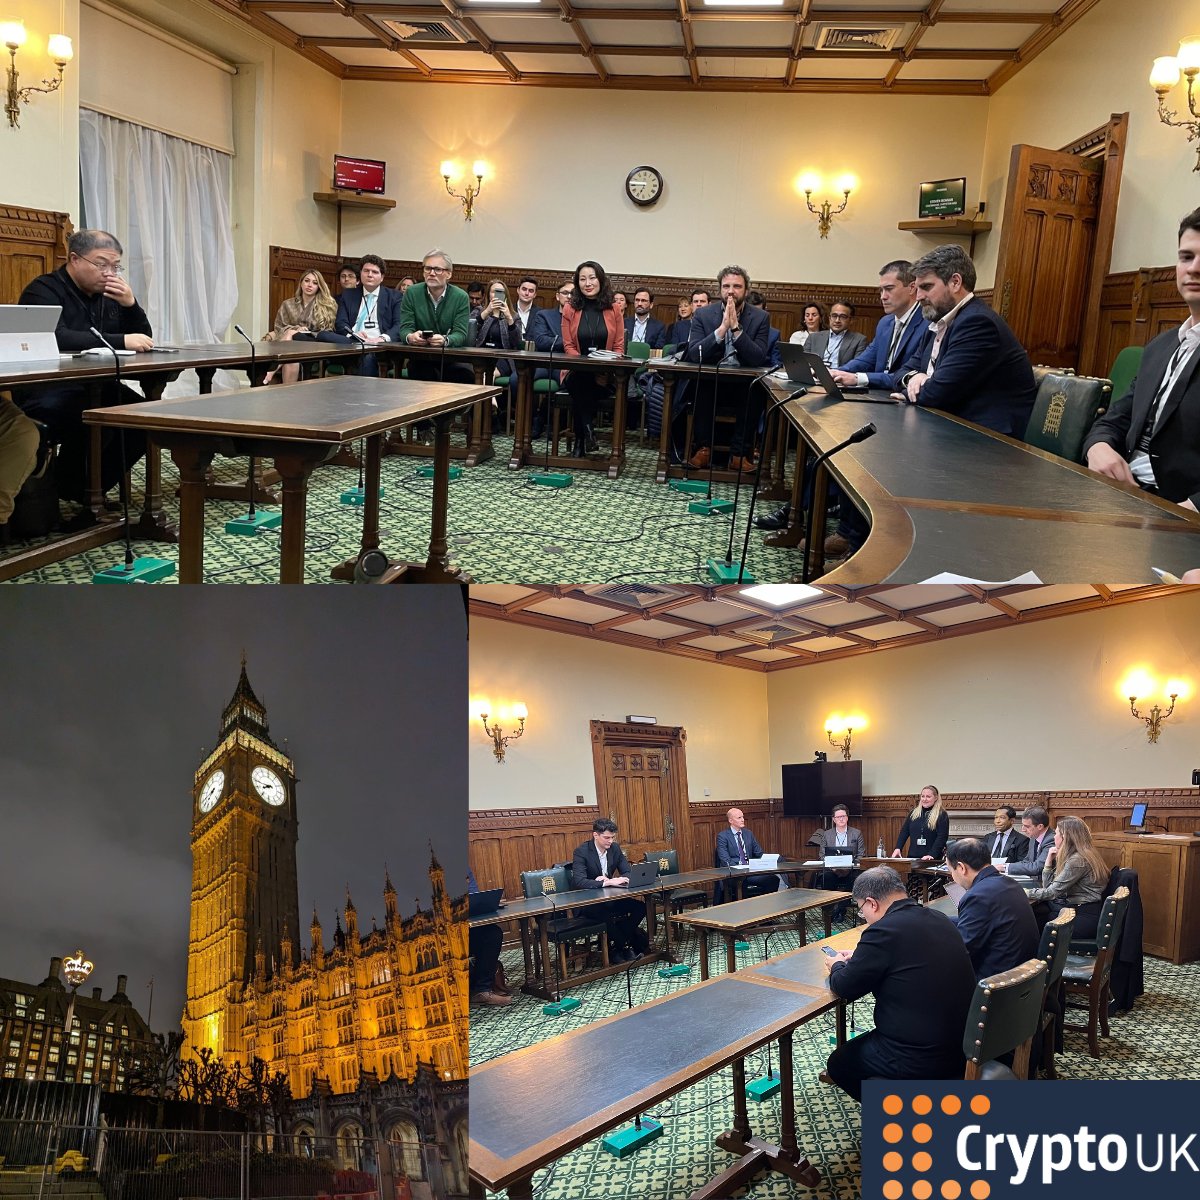 CryptoUK’s @ijtaylor75 was delighted to speak at the @cryptoappg Industry Roundtable alongside @GreengageCo, @B2C2Group & @moonpay to discuss some of the most pressing challenges, opportunities and regulatory considerations facing the UK's #digitalasssets industry. #Crypto